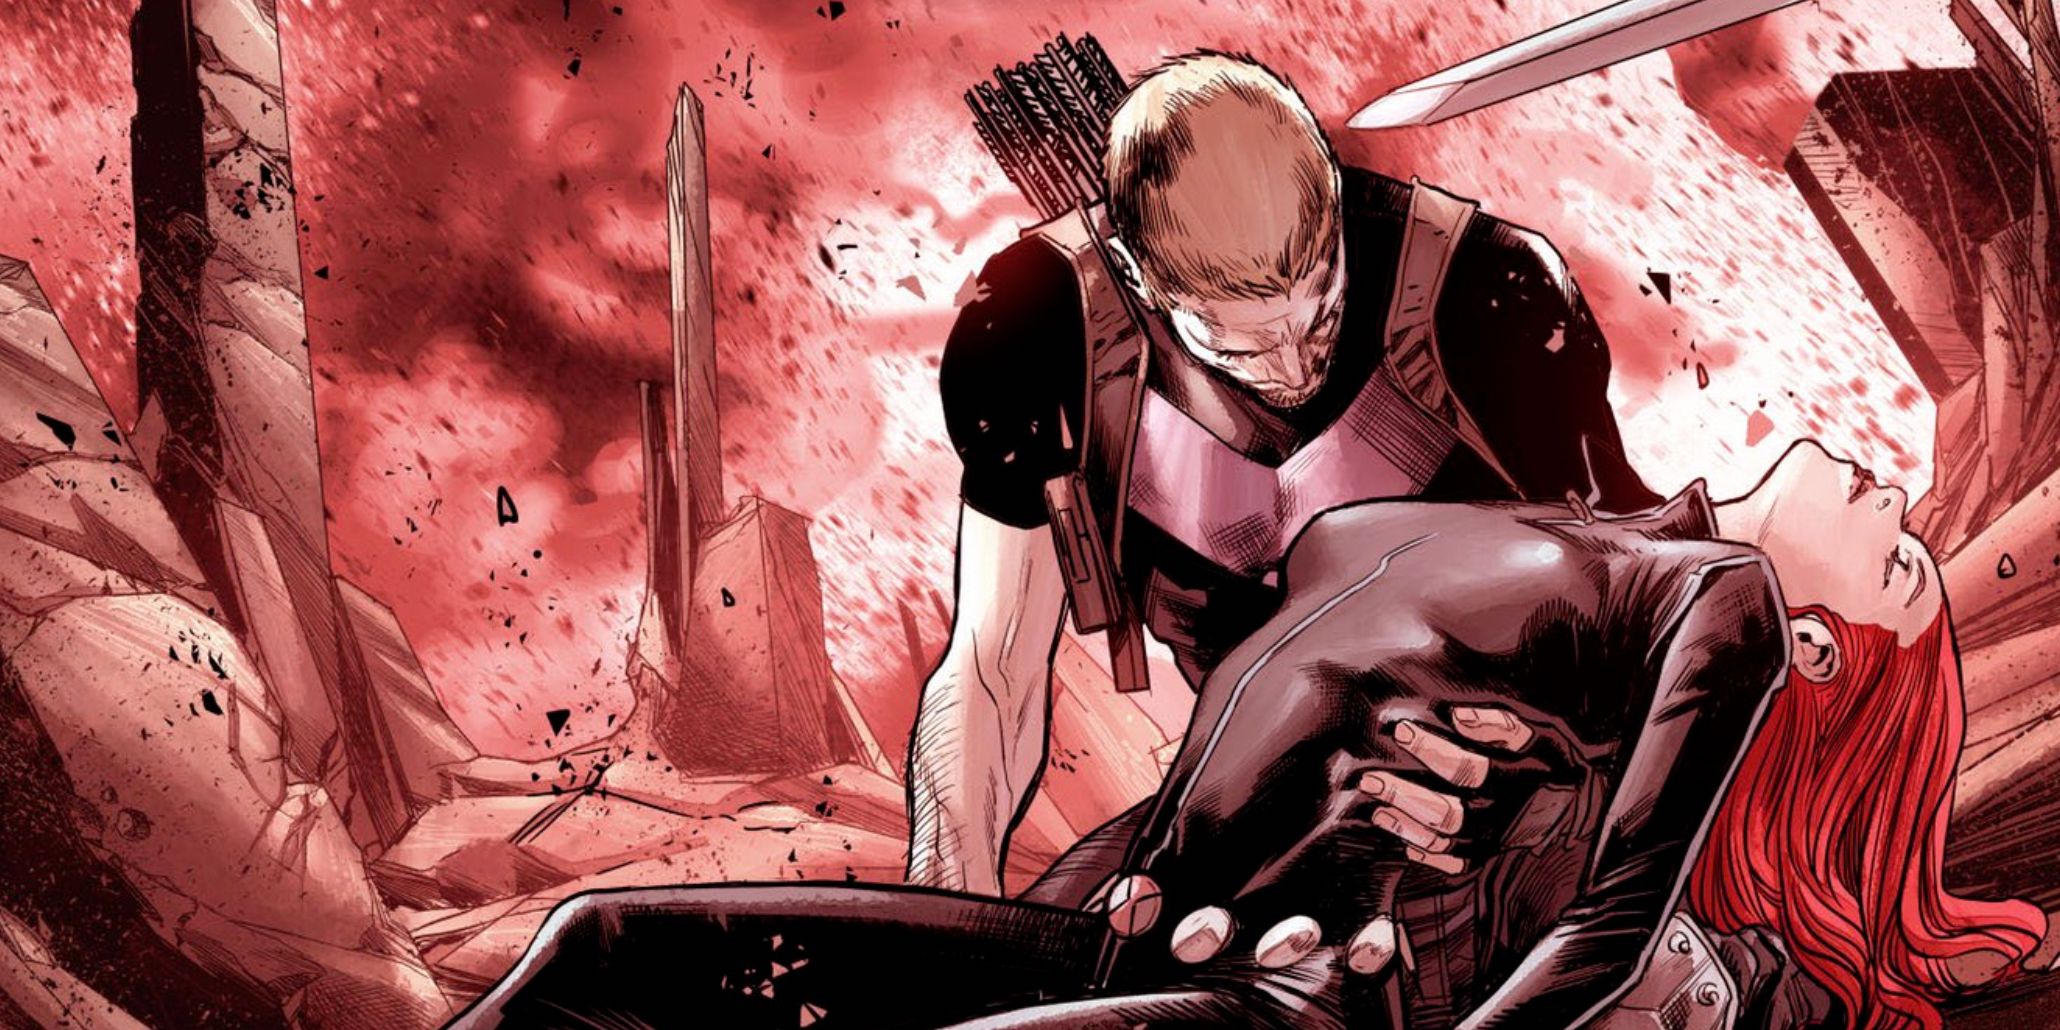 Clint cradles a lifeless Natasha in a red wasteland in Marvel comics